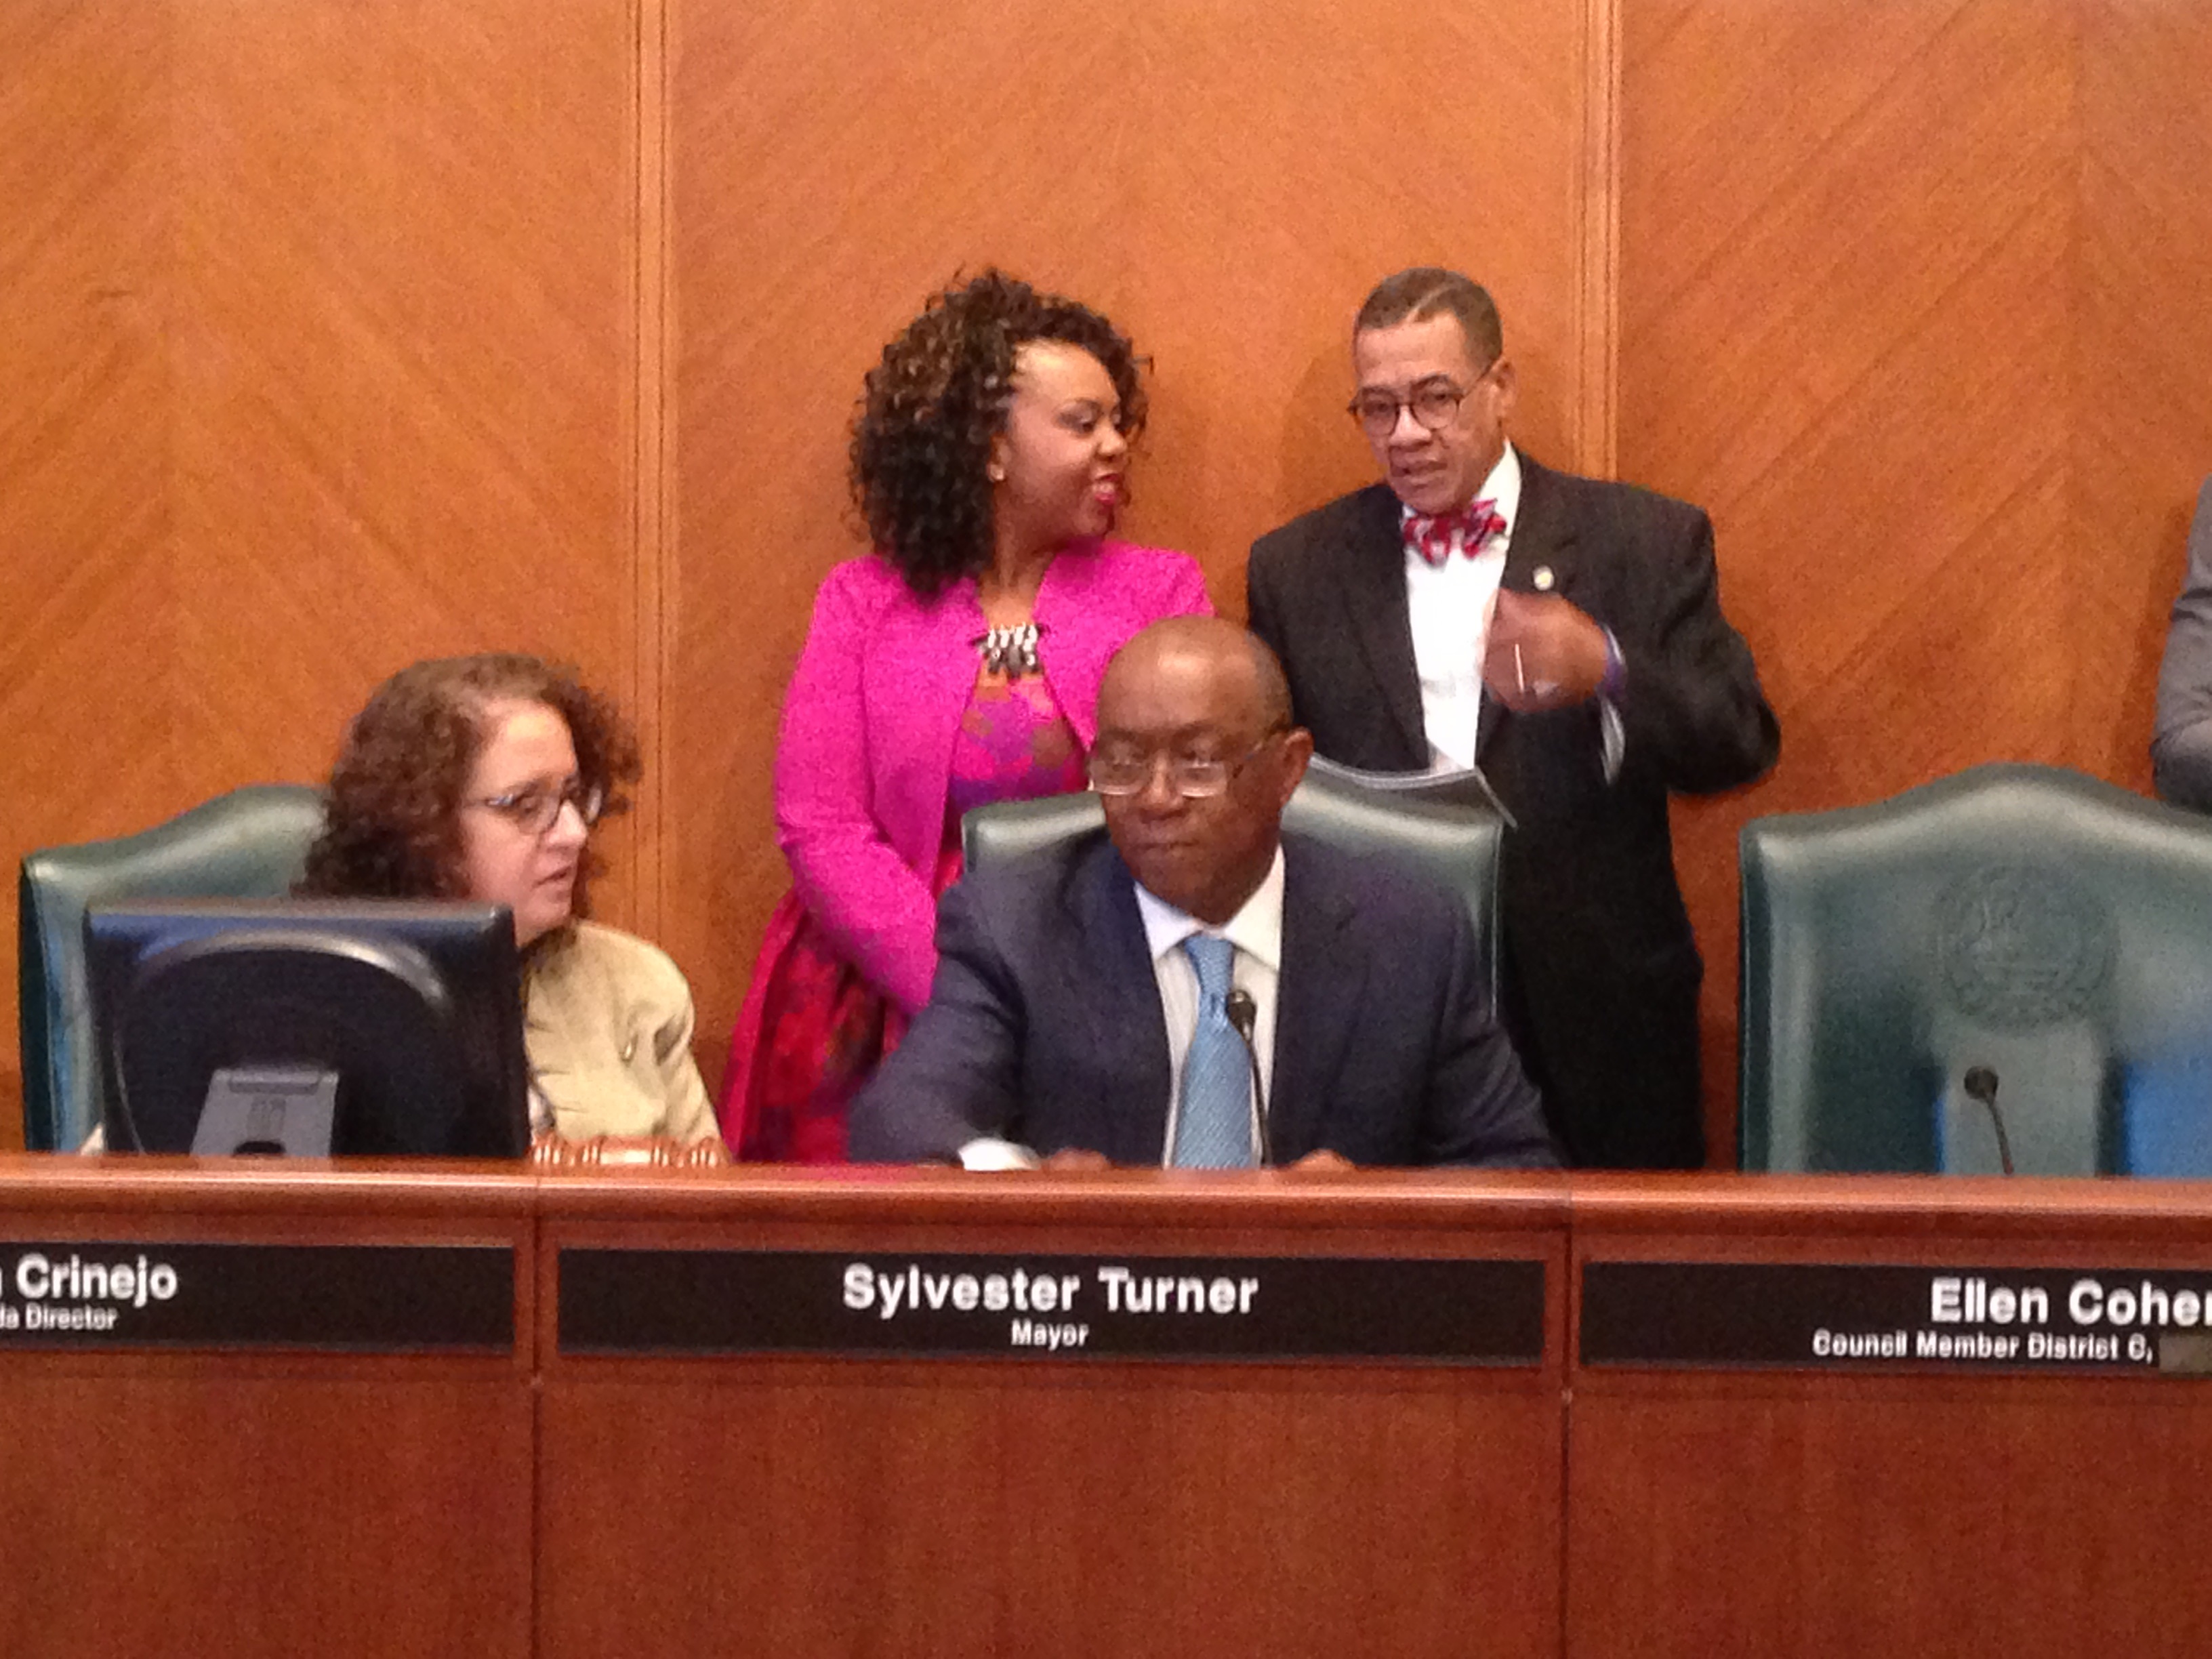 Houston's new Mayor Sylvester Turner presided over the City Council meeting for the first time on Monday.